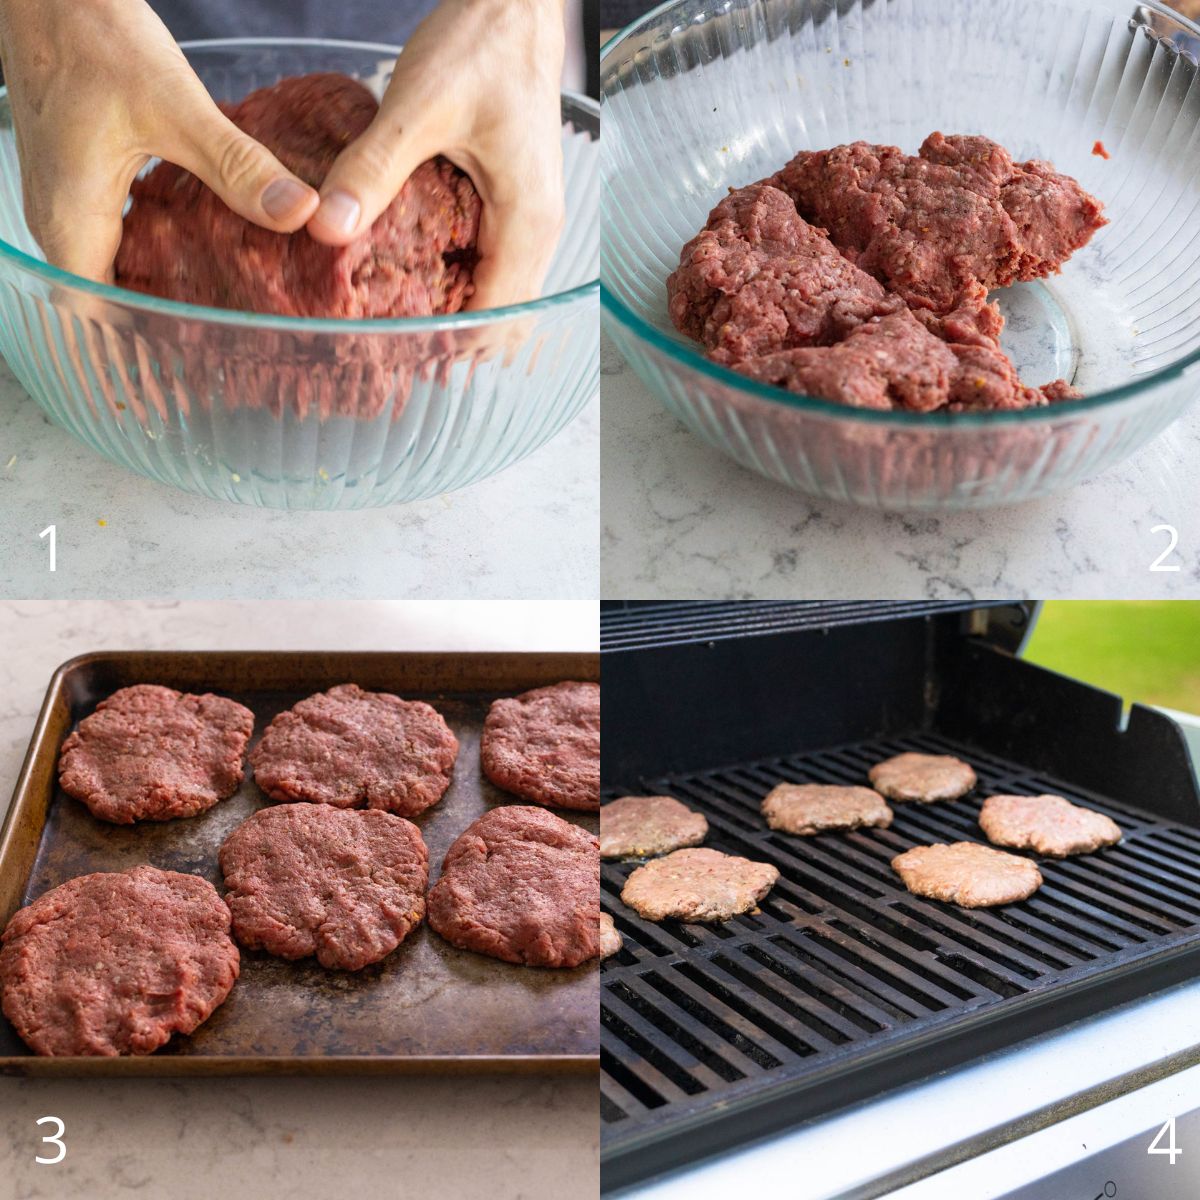 The photo collage shows how to prep the burger patties.